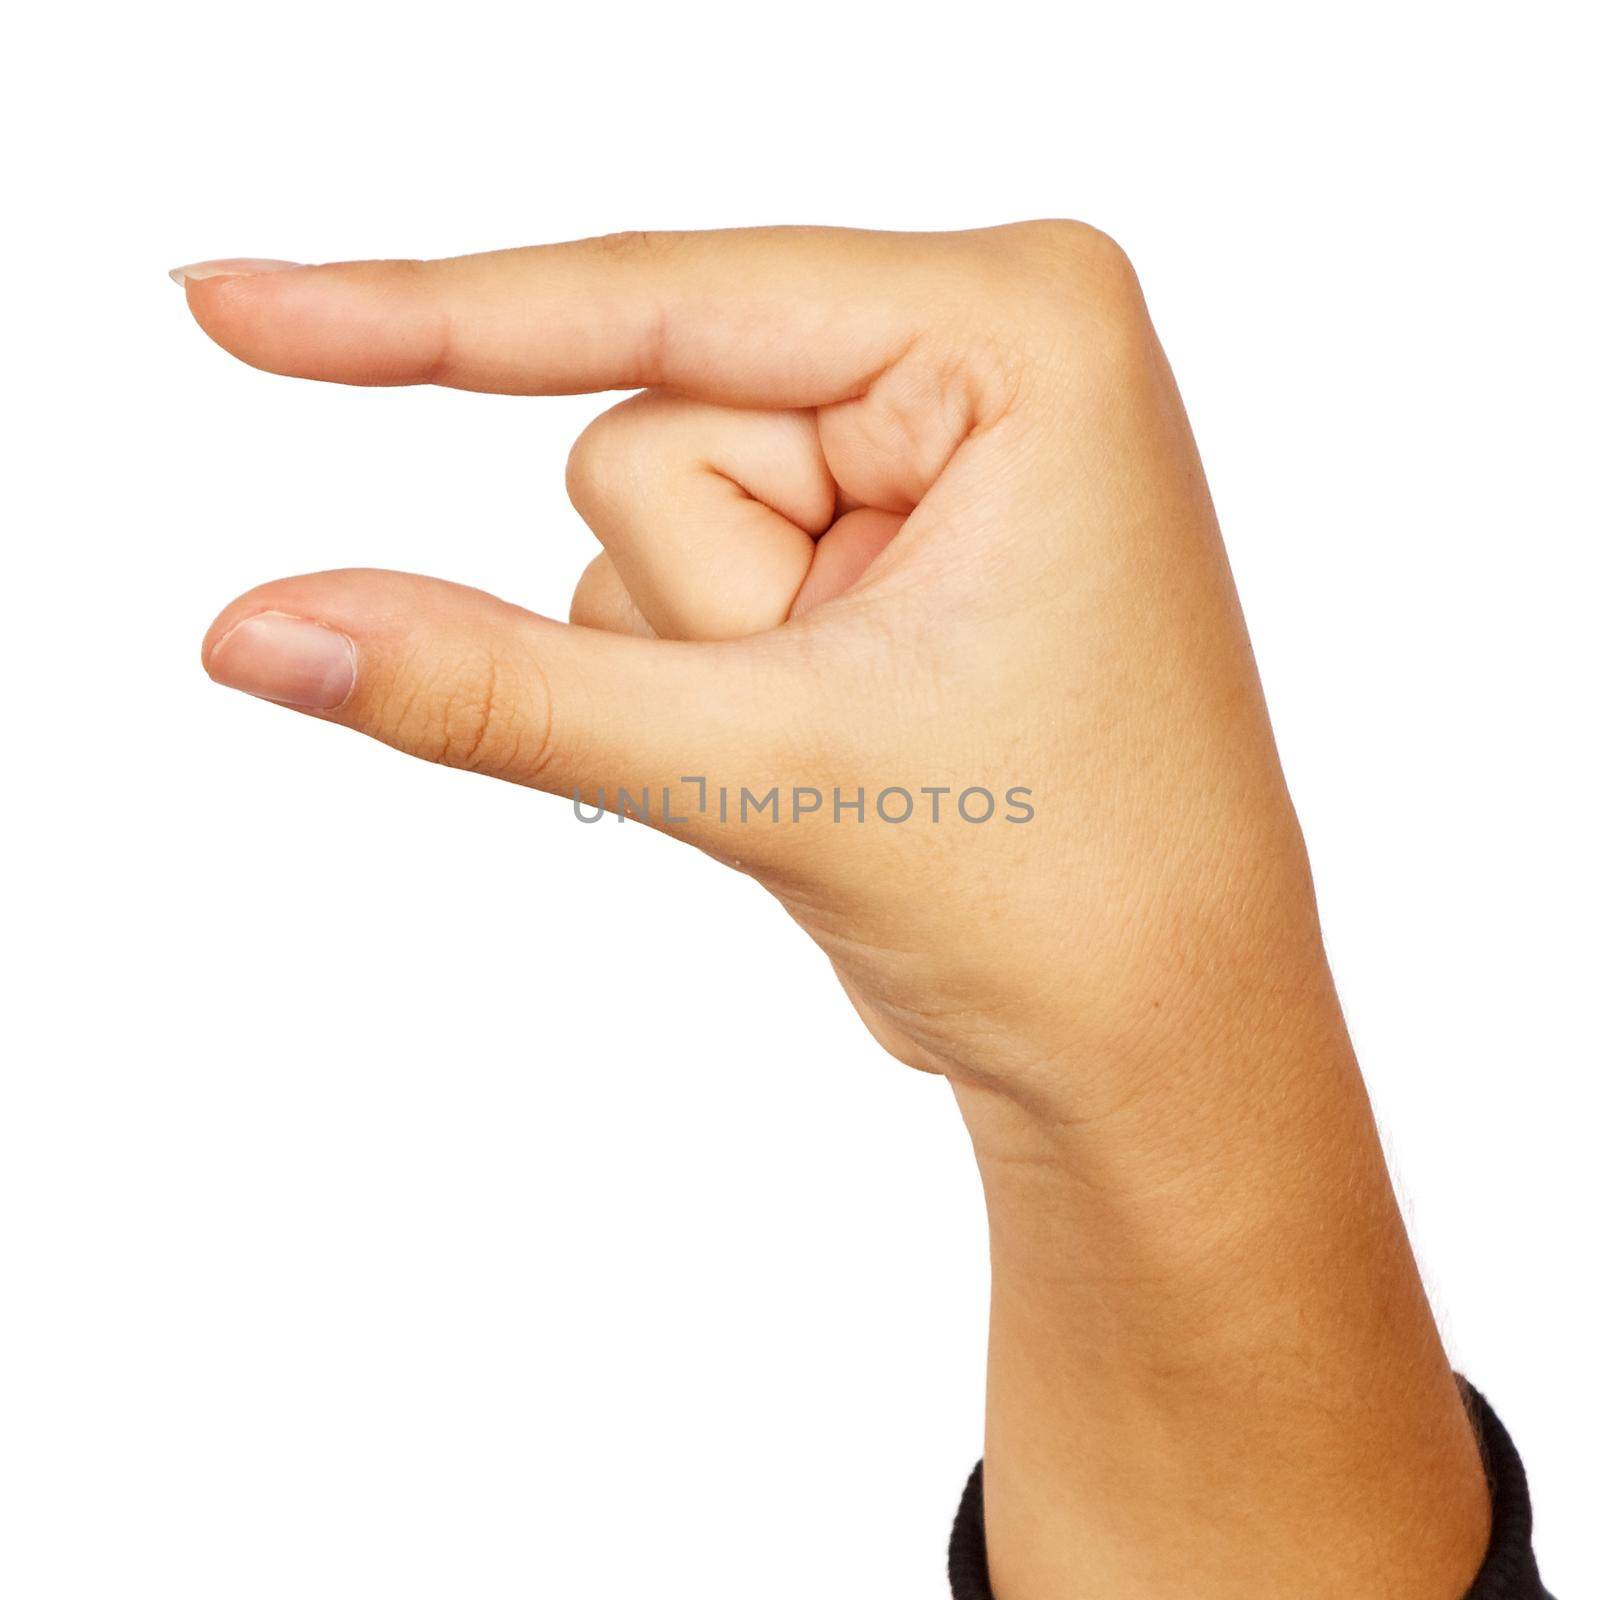 american sign language. female hand showing letter g by raddnatt